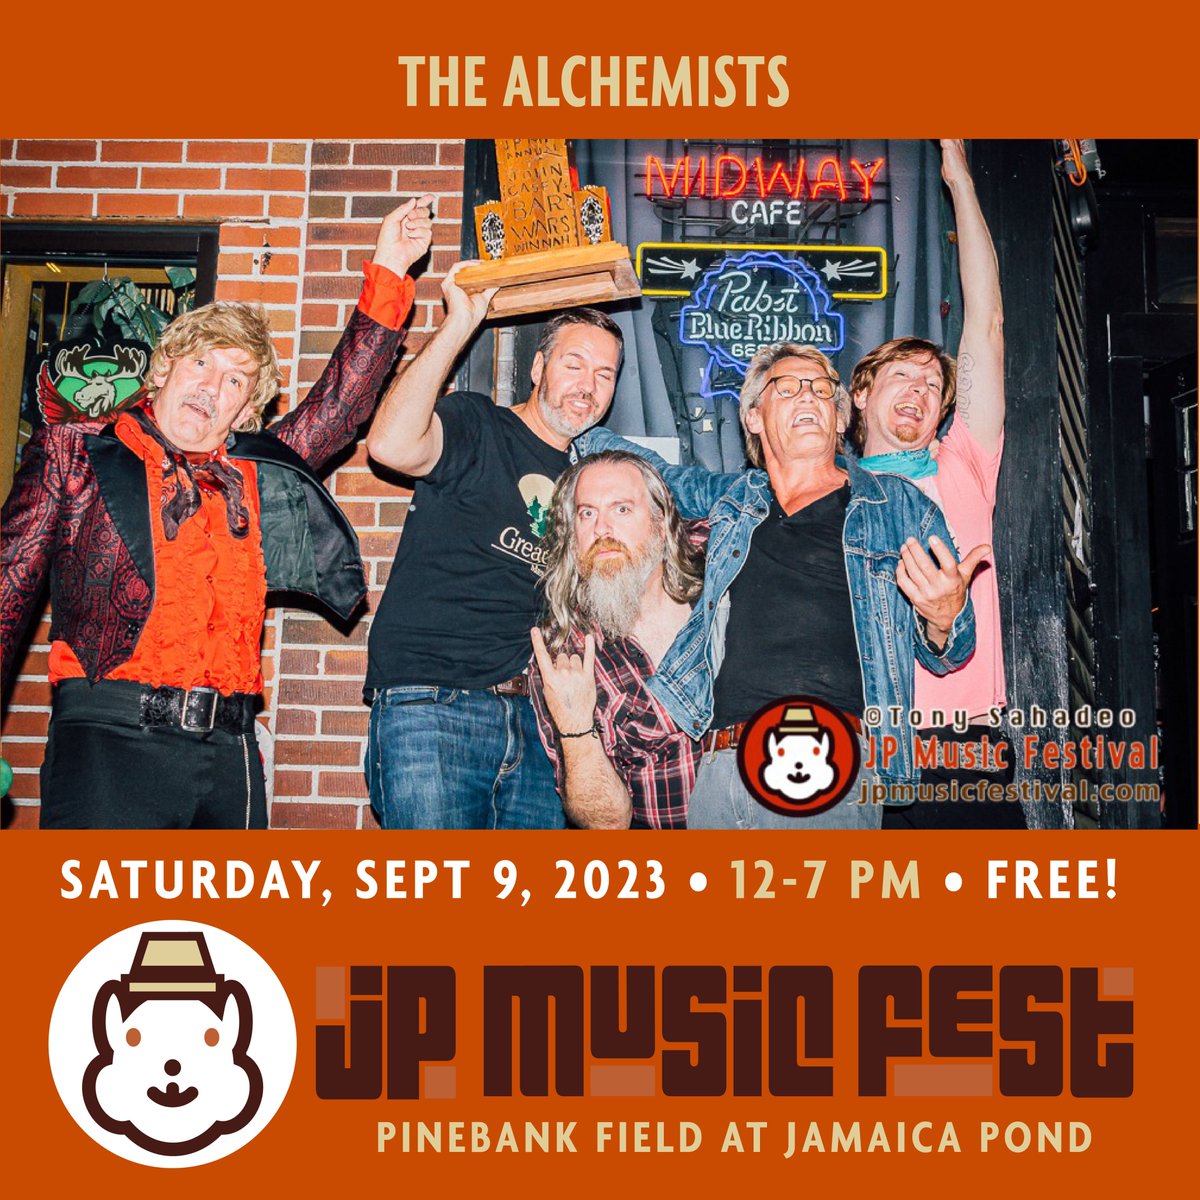 Festival starts at noon w The Alchemists...and you're not going to want to miss them! Winners of JP Bar Wars they perform only covers of the day with Jam’s In the City, MC5’s Kick Out the Jams, AC/DC’s If You Want Blood, and Buzzcocks Why Can’t I Touch It? #jamaicaplain